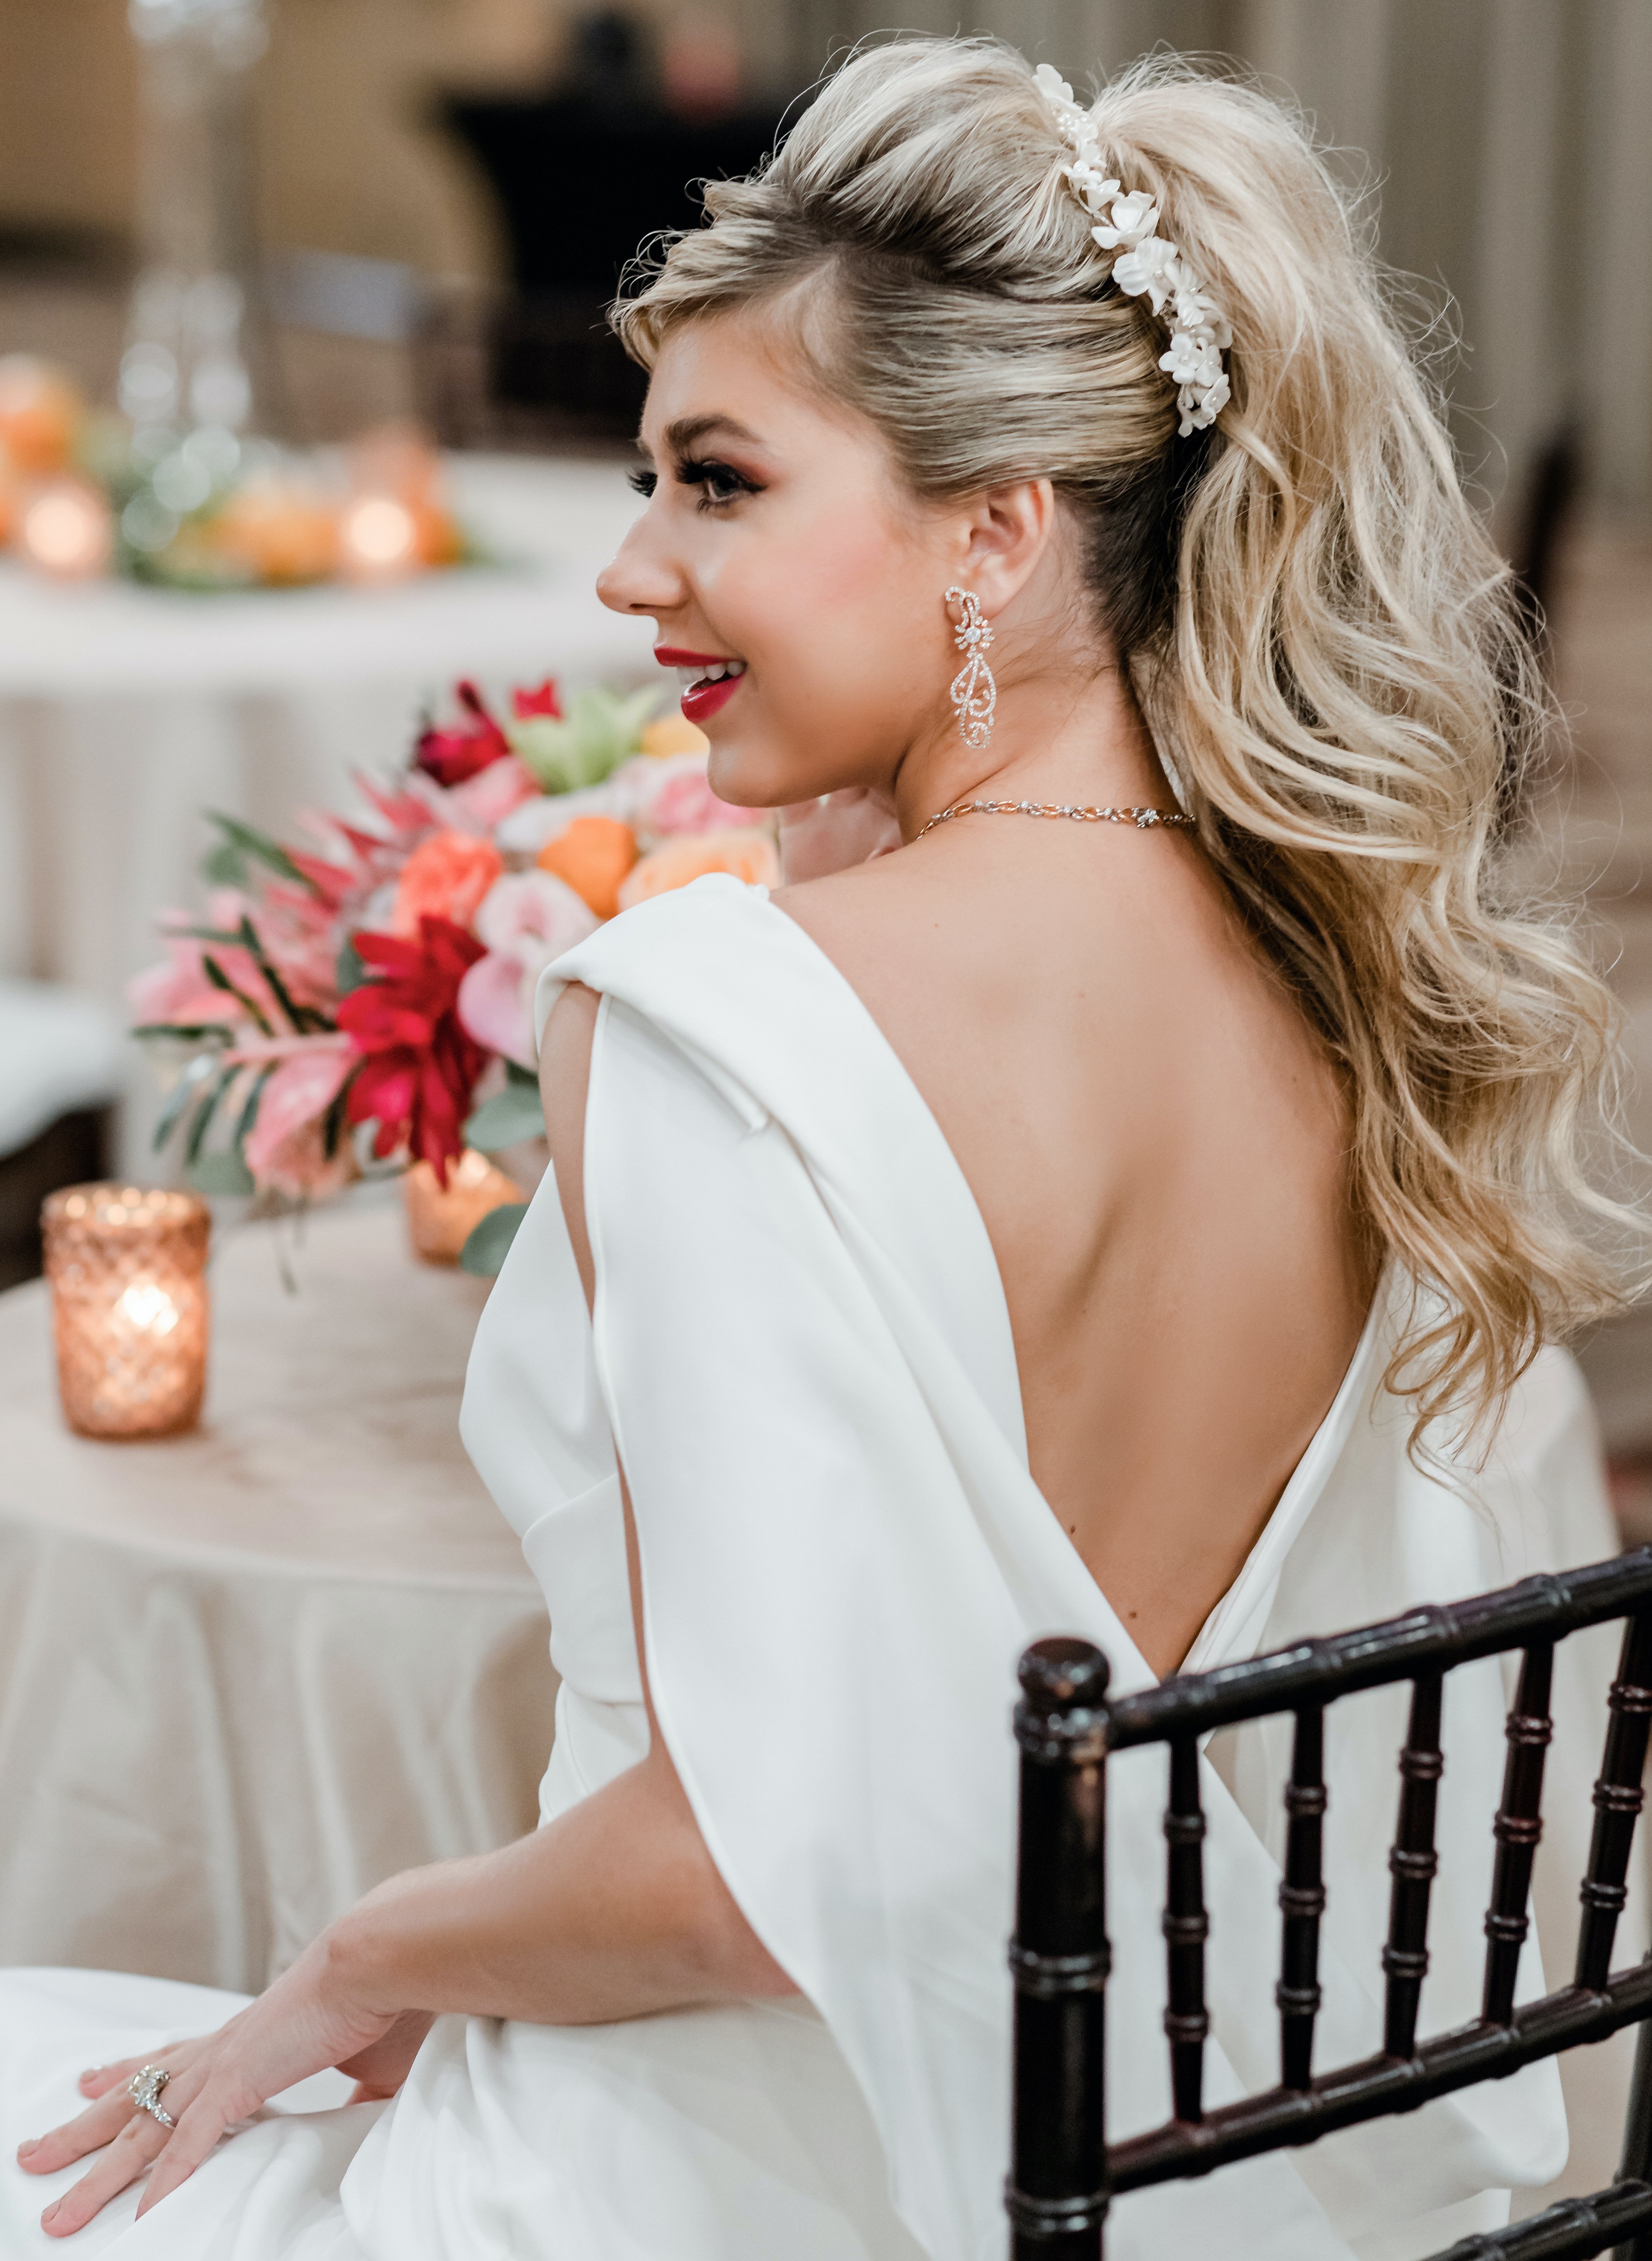 A bride's back is to the camera as she looks to the side. Her hair is in a curly high ponytail with a flower comb tucked within it.